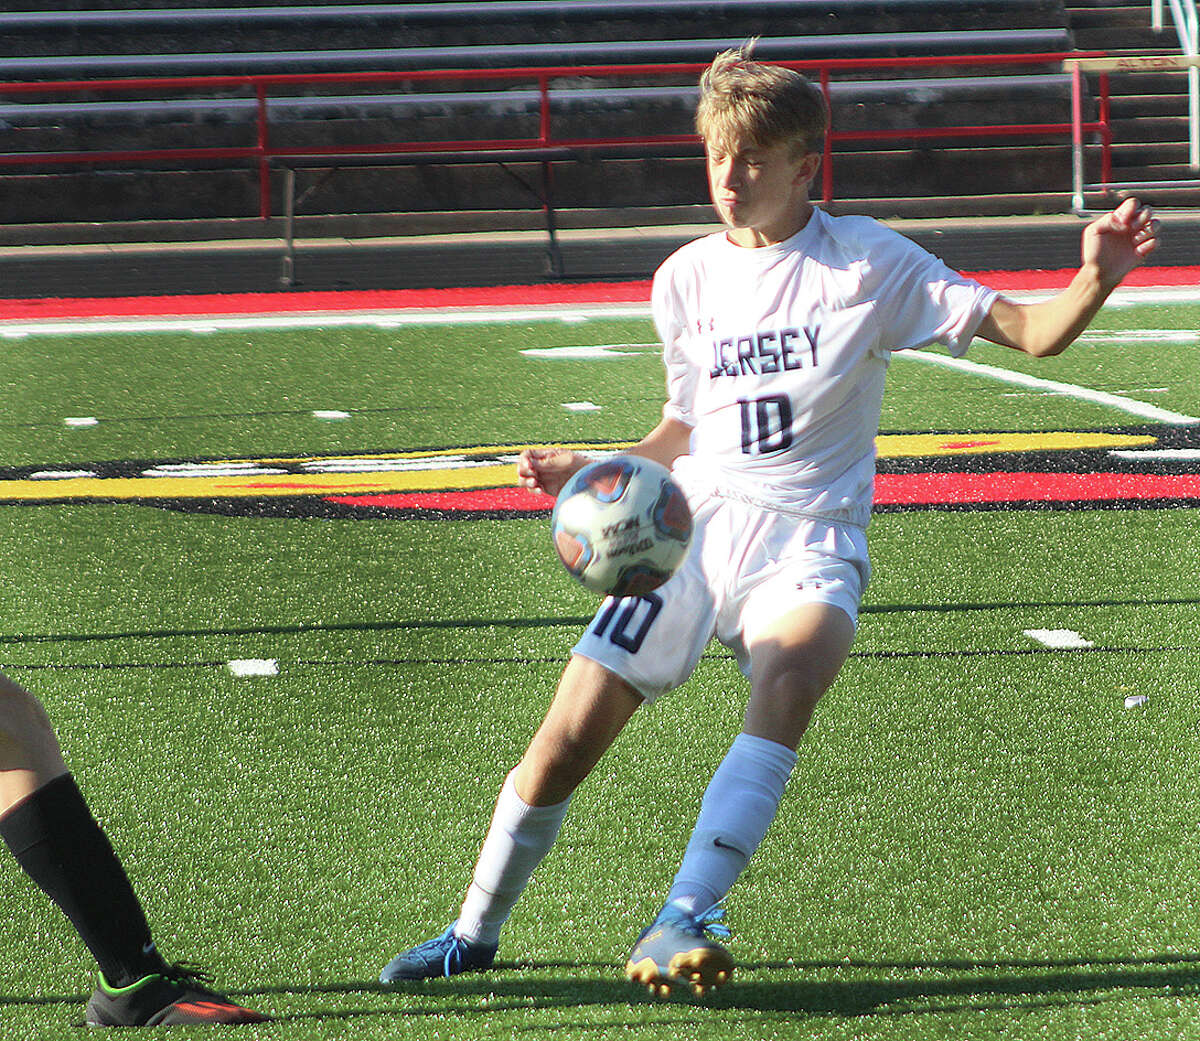 Logan Strong scored a pair of goals for Jersey Wednesday in a 5-0 non-conference victory over Lebanon. Strong is shown in action earlier this season against Alton at Public School Stadium.